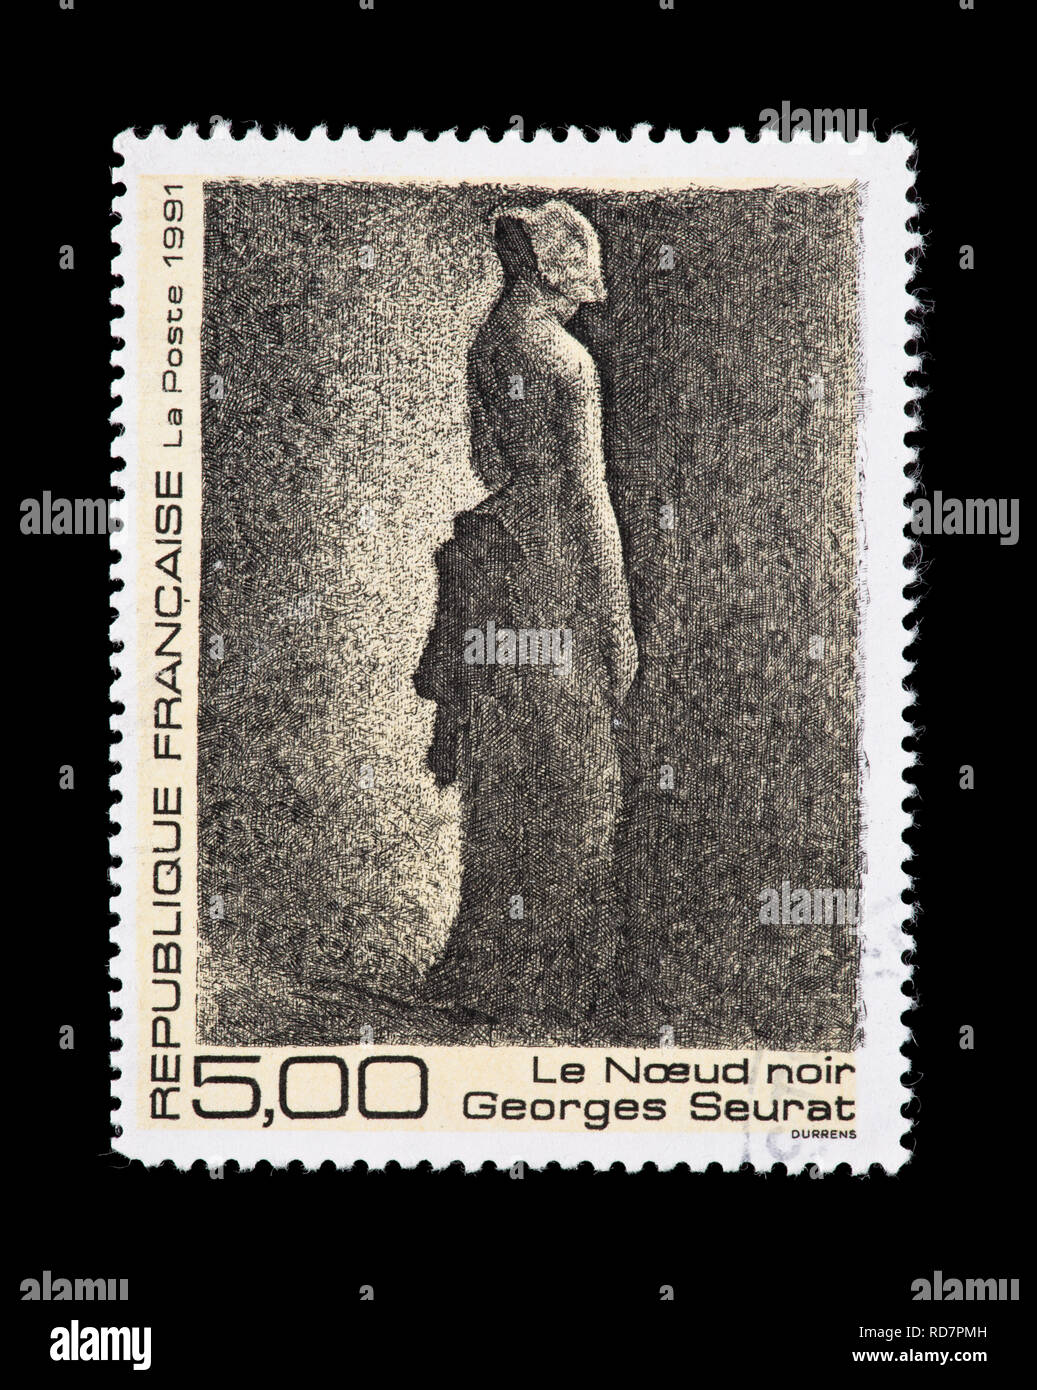 Postage stamp from France depicting the Georges Seurat painting Le Noeud Noir Stock Photo